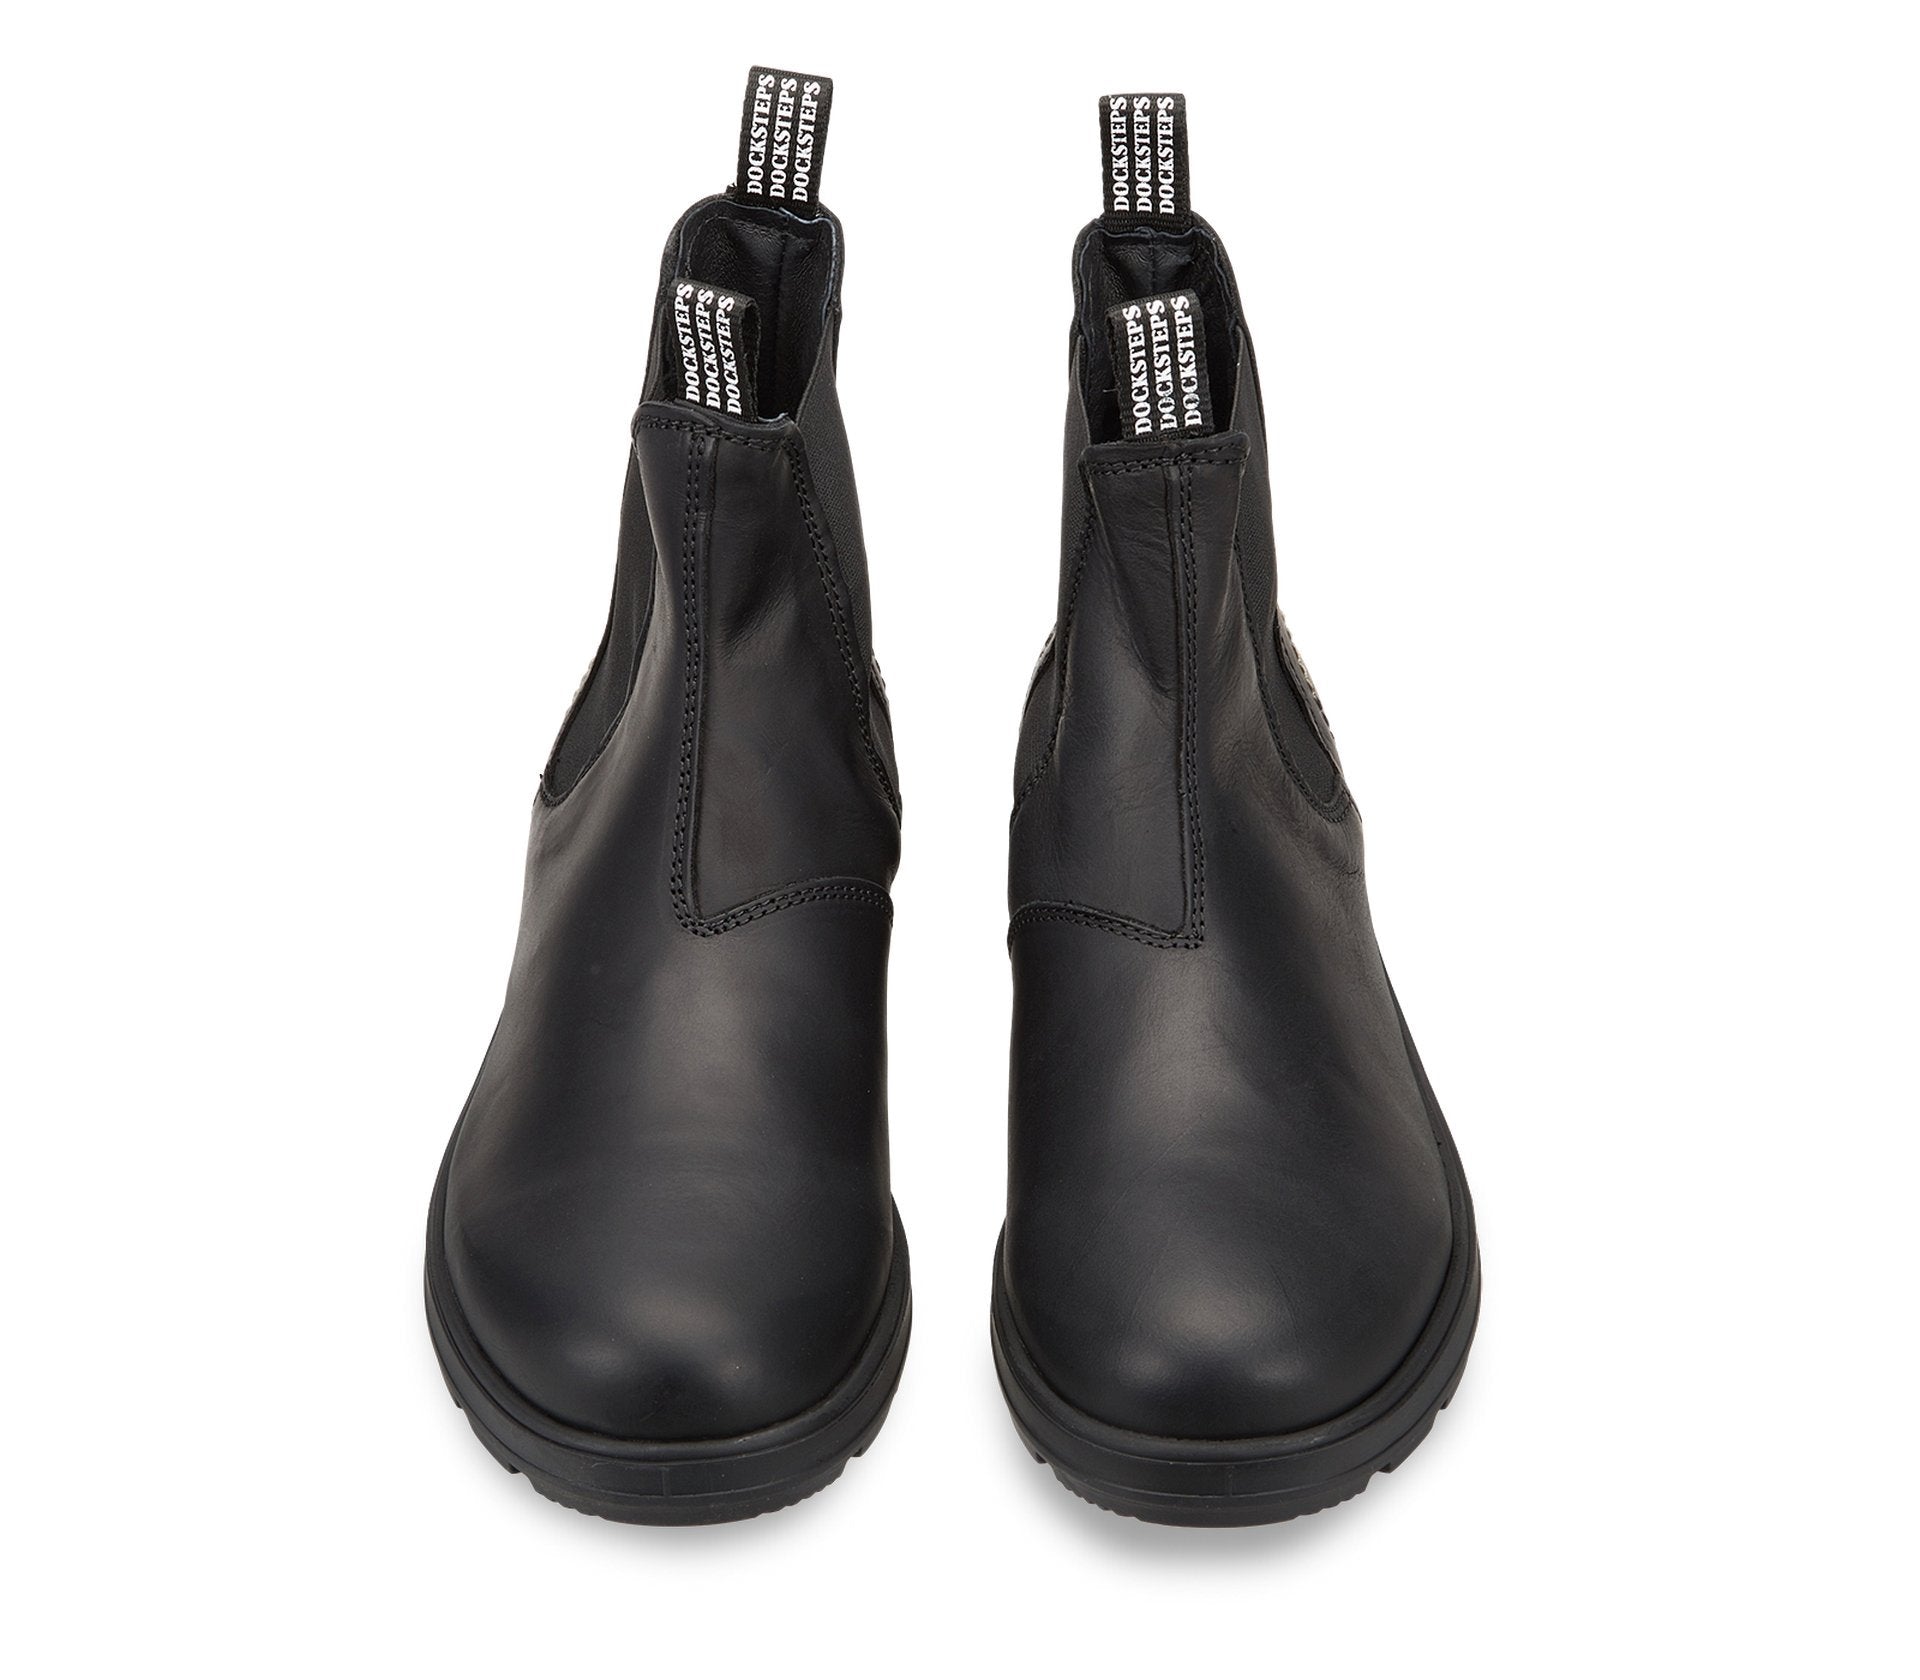 Black Men's Beatle Boots with Pull Up Rear and Front